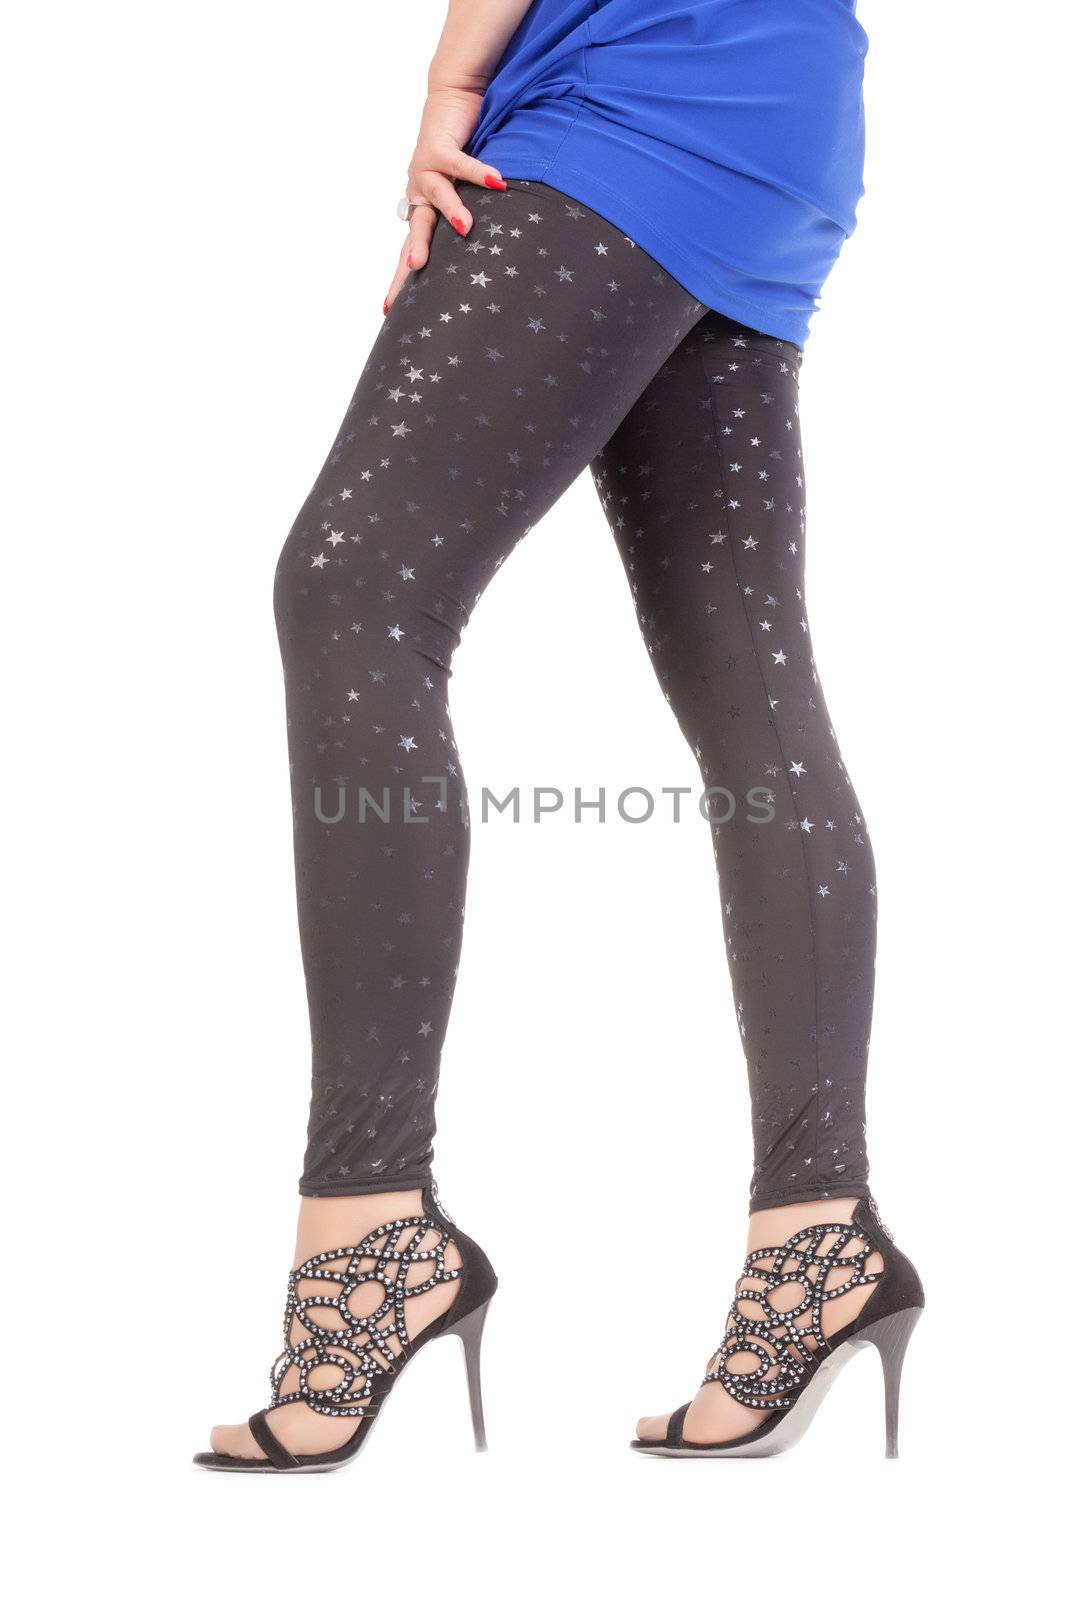 Sexy stylish legs in shimmering black leggins by Discovod